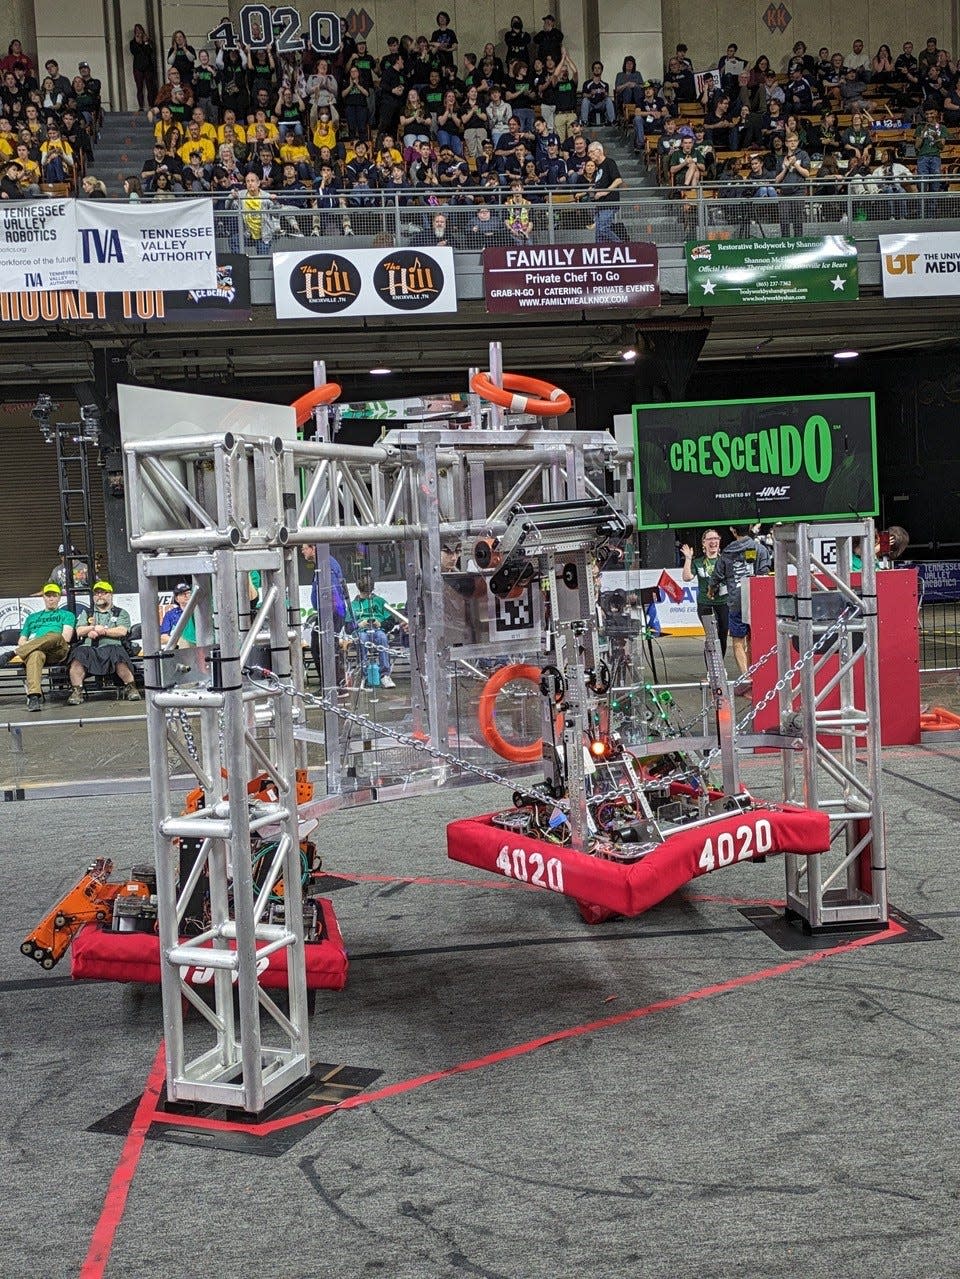 The robots were tasked with moving musical “notes” (rings) into “speakers” (boxes) at various points in an obstacle course.